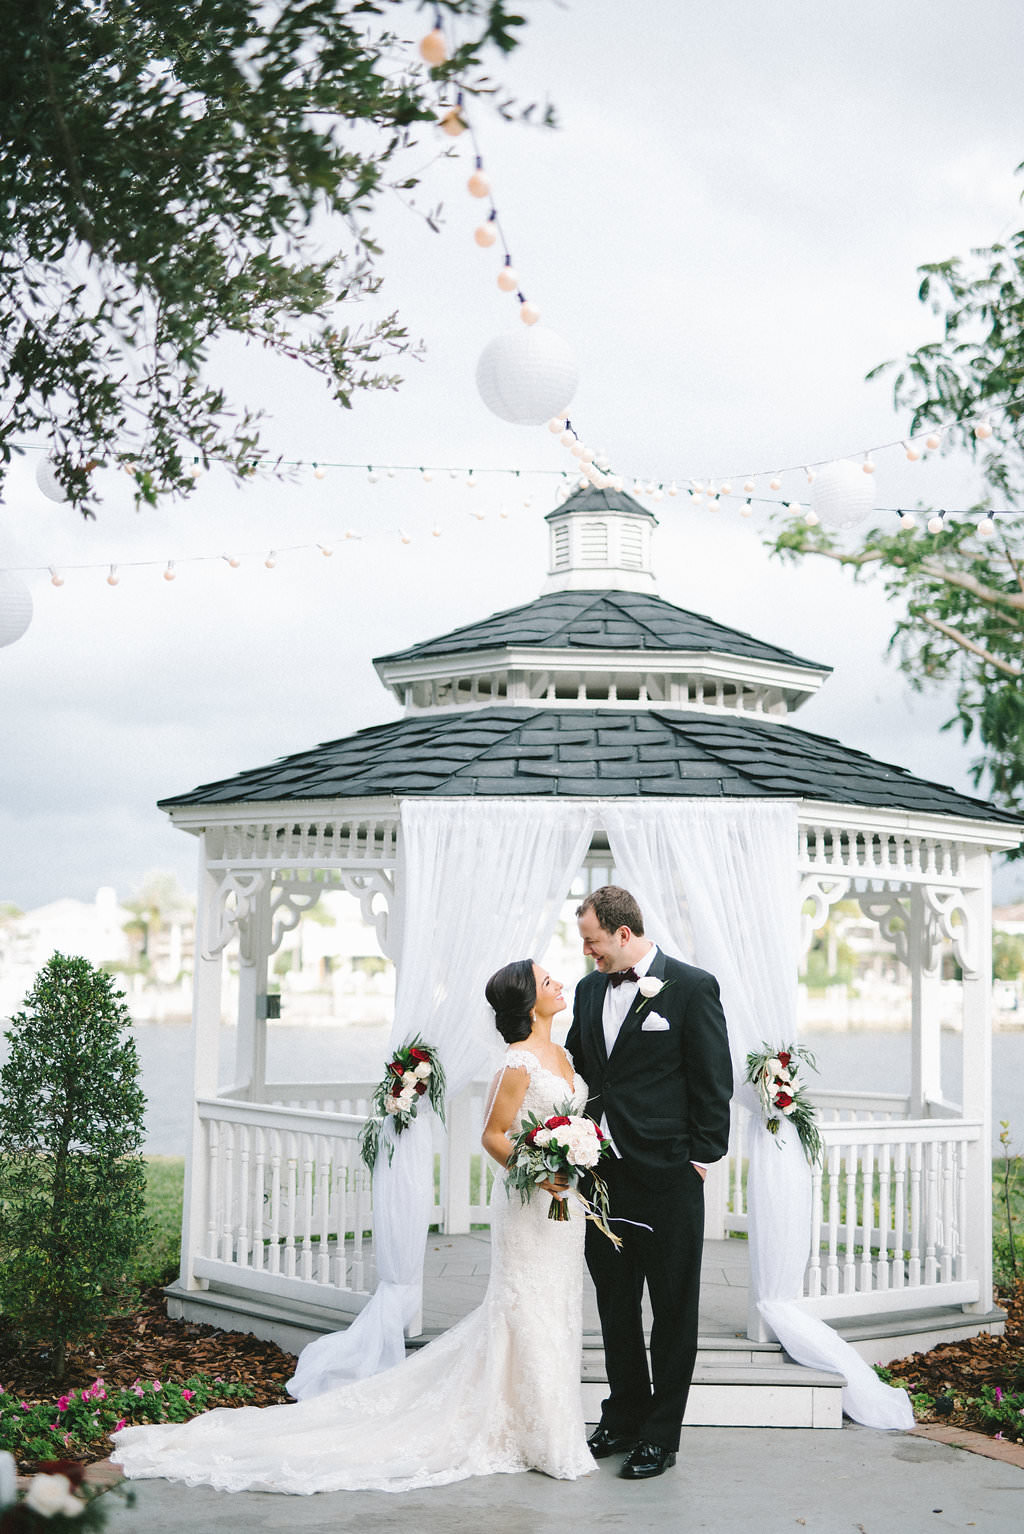 Outdoor Garden Wedding Ceremony Portrait, Bride and Groom in front of White Draped Gazebo with String LIghts and White Paper Lanters, White and Red Rose Florals and Bouquet with Greenery | Tampa Wedding Photographer Kera Photography | Waterfront Ceremony Venue Davis Island Garden Club